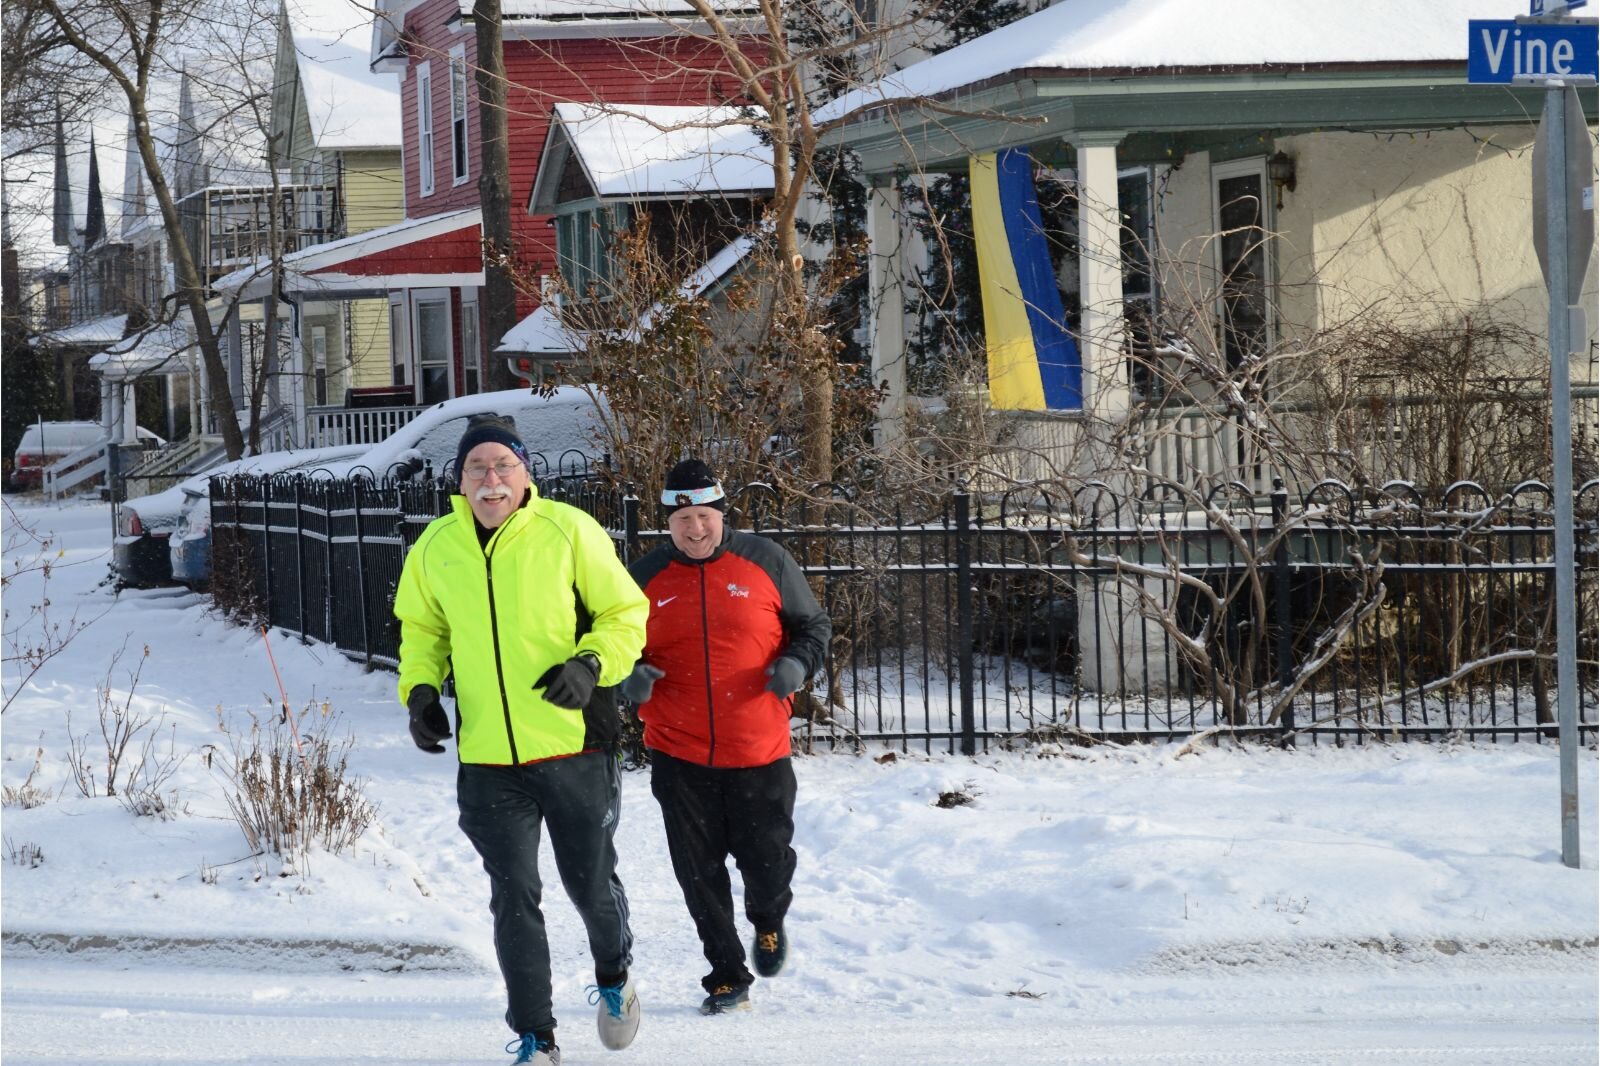 Tom Weissert (left) hits the snowy streets of Kalamazoo. He says, "You run on that collective motivation. Everybody is encouraging everybody else. It's a very inclusive democratic process. All body shapes, all ages, all backgrounds."